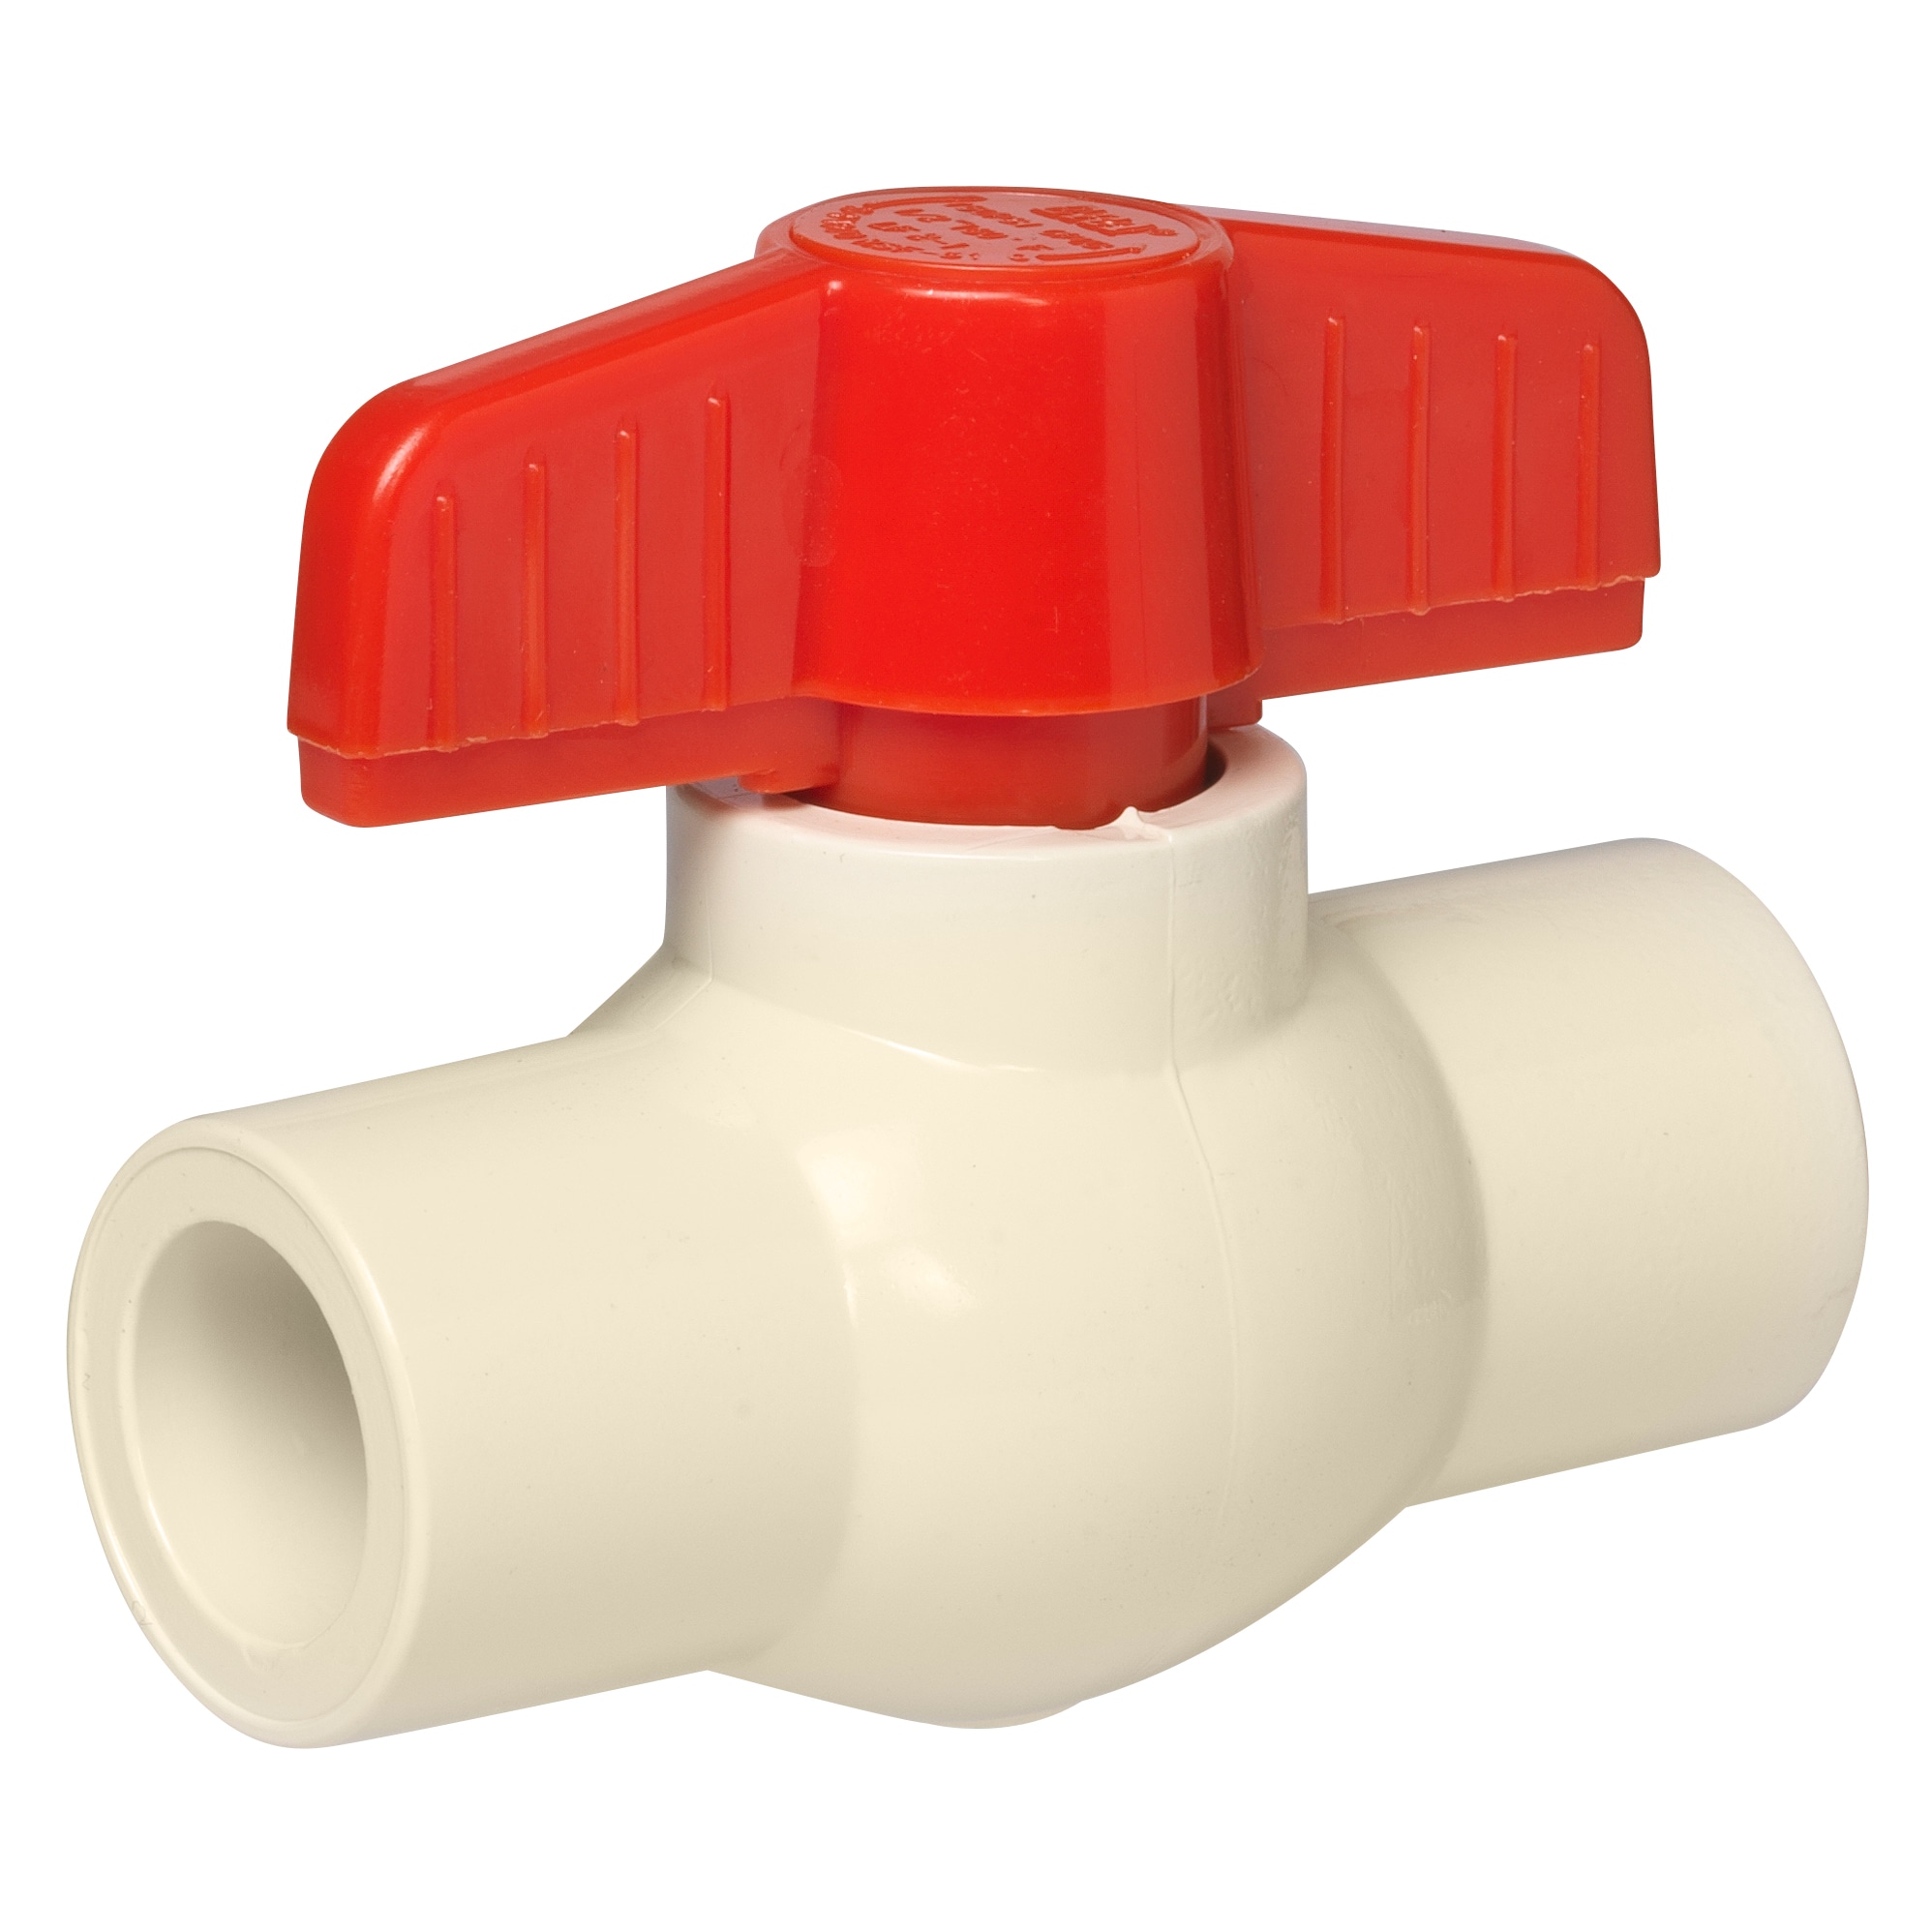 Plumbing Components, Valves, & Fittings